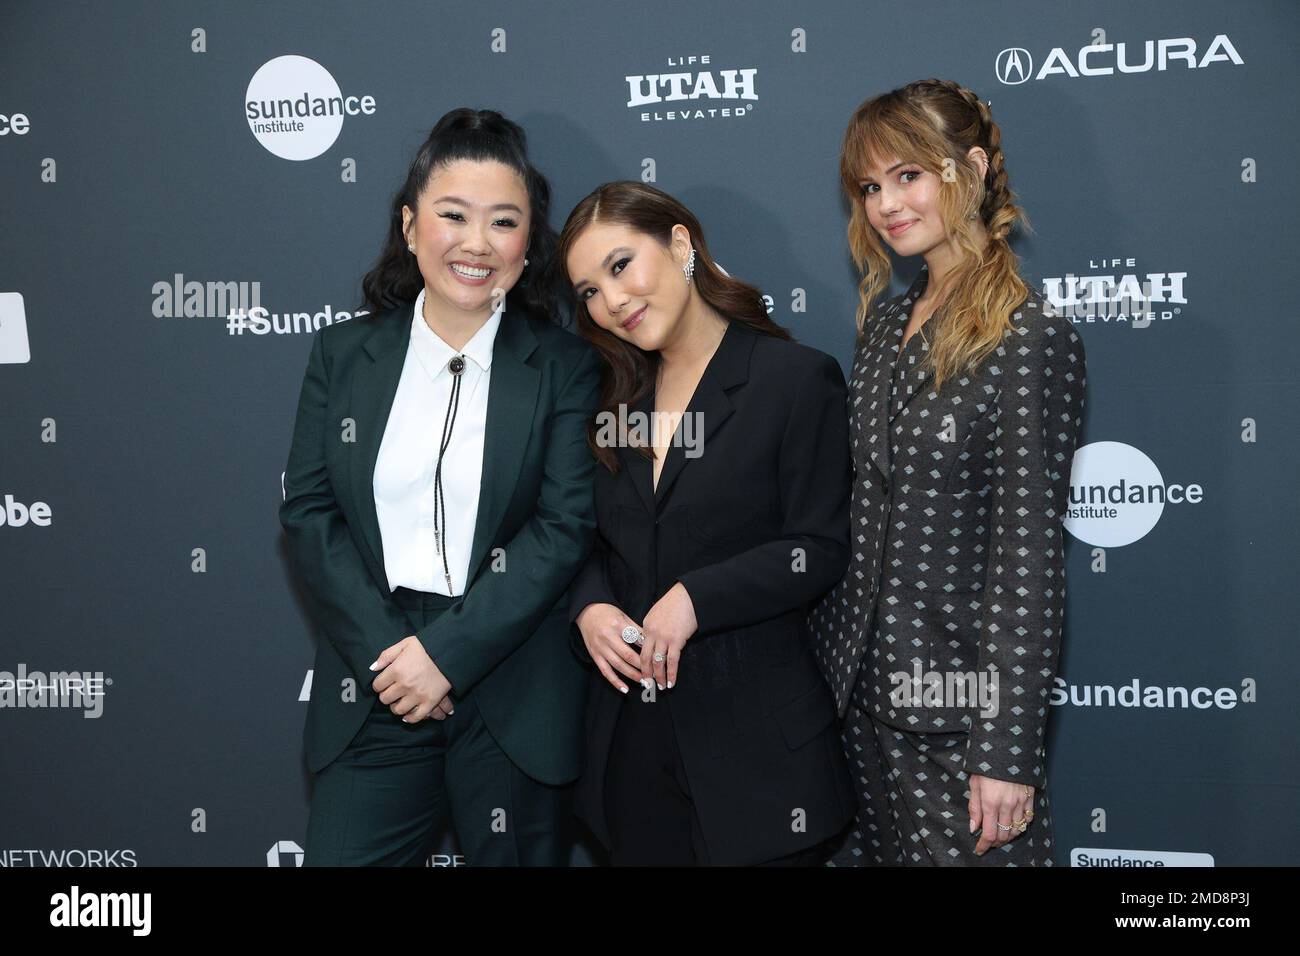 Park City, UT, USA. 22nd Jan, 2023. Sherry Cola, Ally Maki, Debby Ryan at arrivals for SHORTCOMINGS Premiere at Sundance Film Festival 2023, Eccles Theater, Park City, UT January 22, 2023. Credit: JA/Everett Collection/Alamy Live News Stock Photo